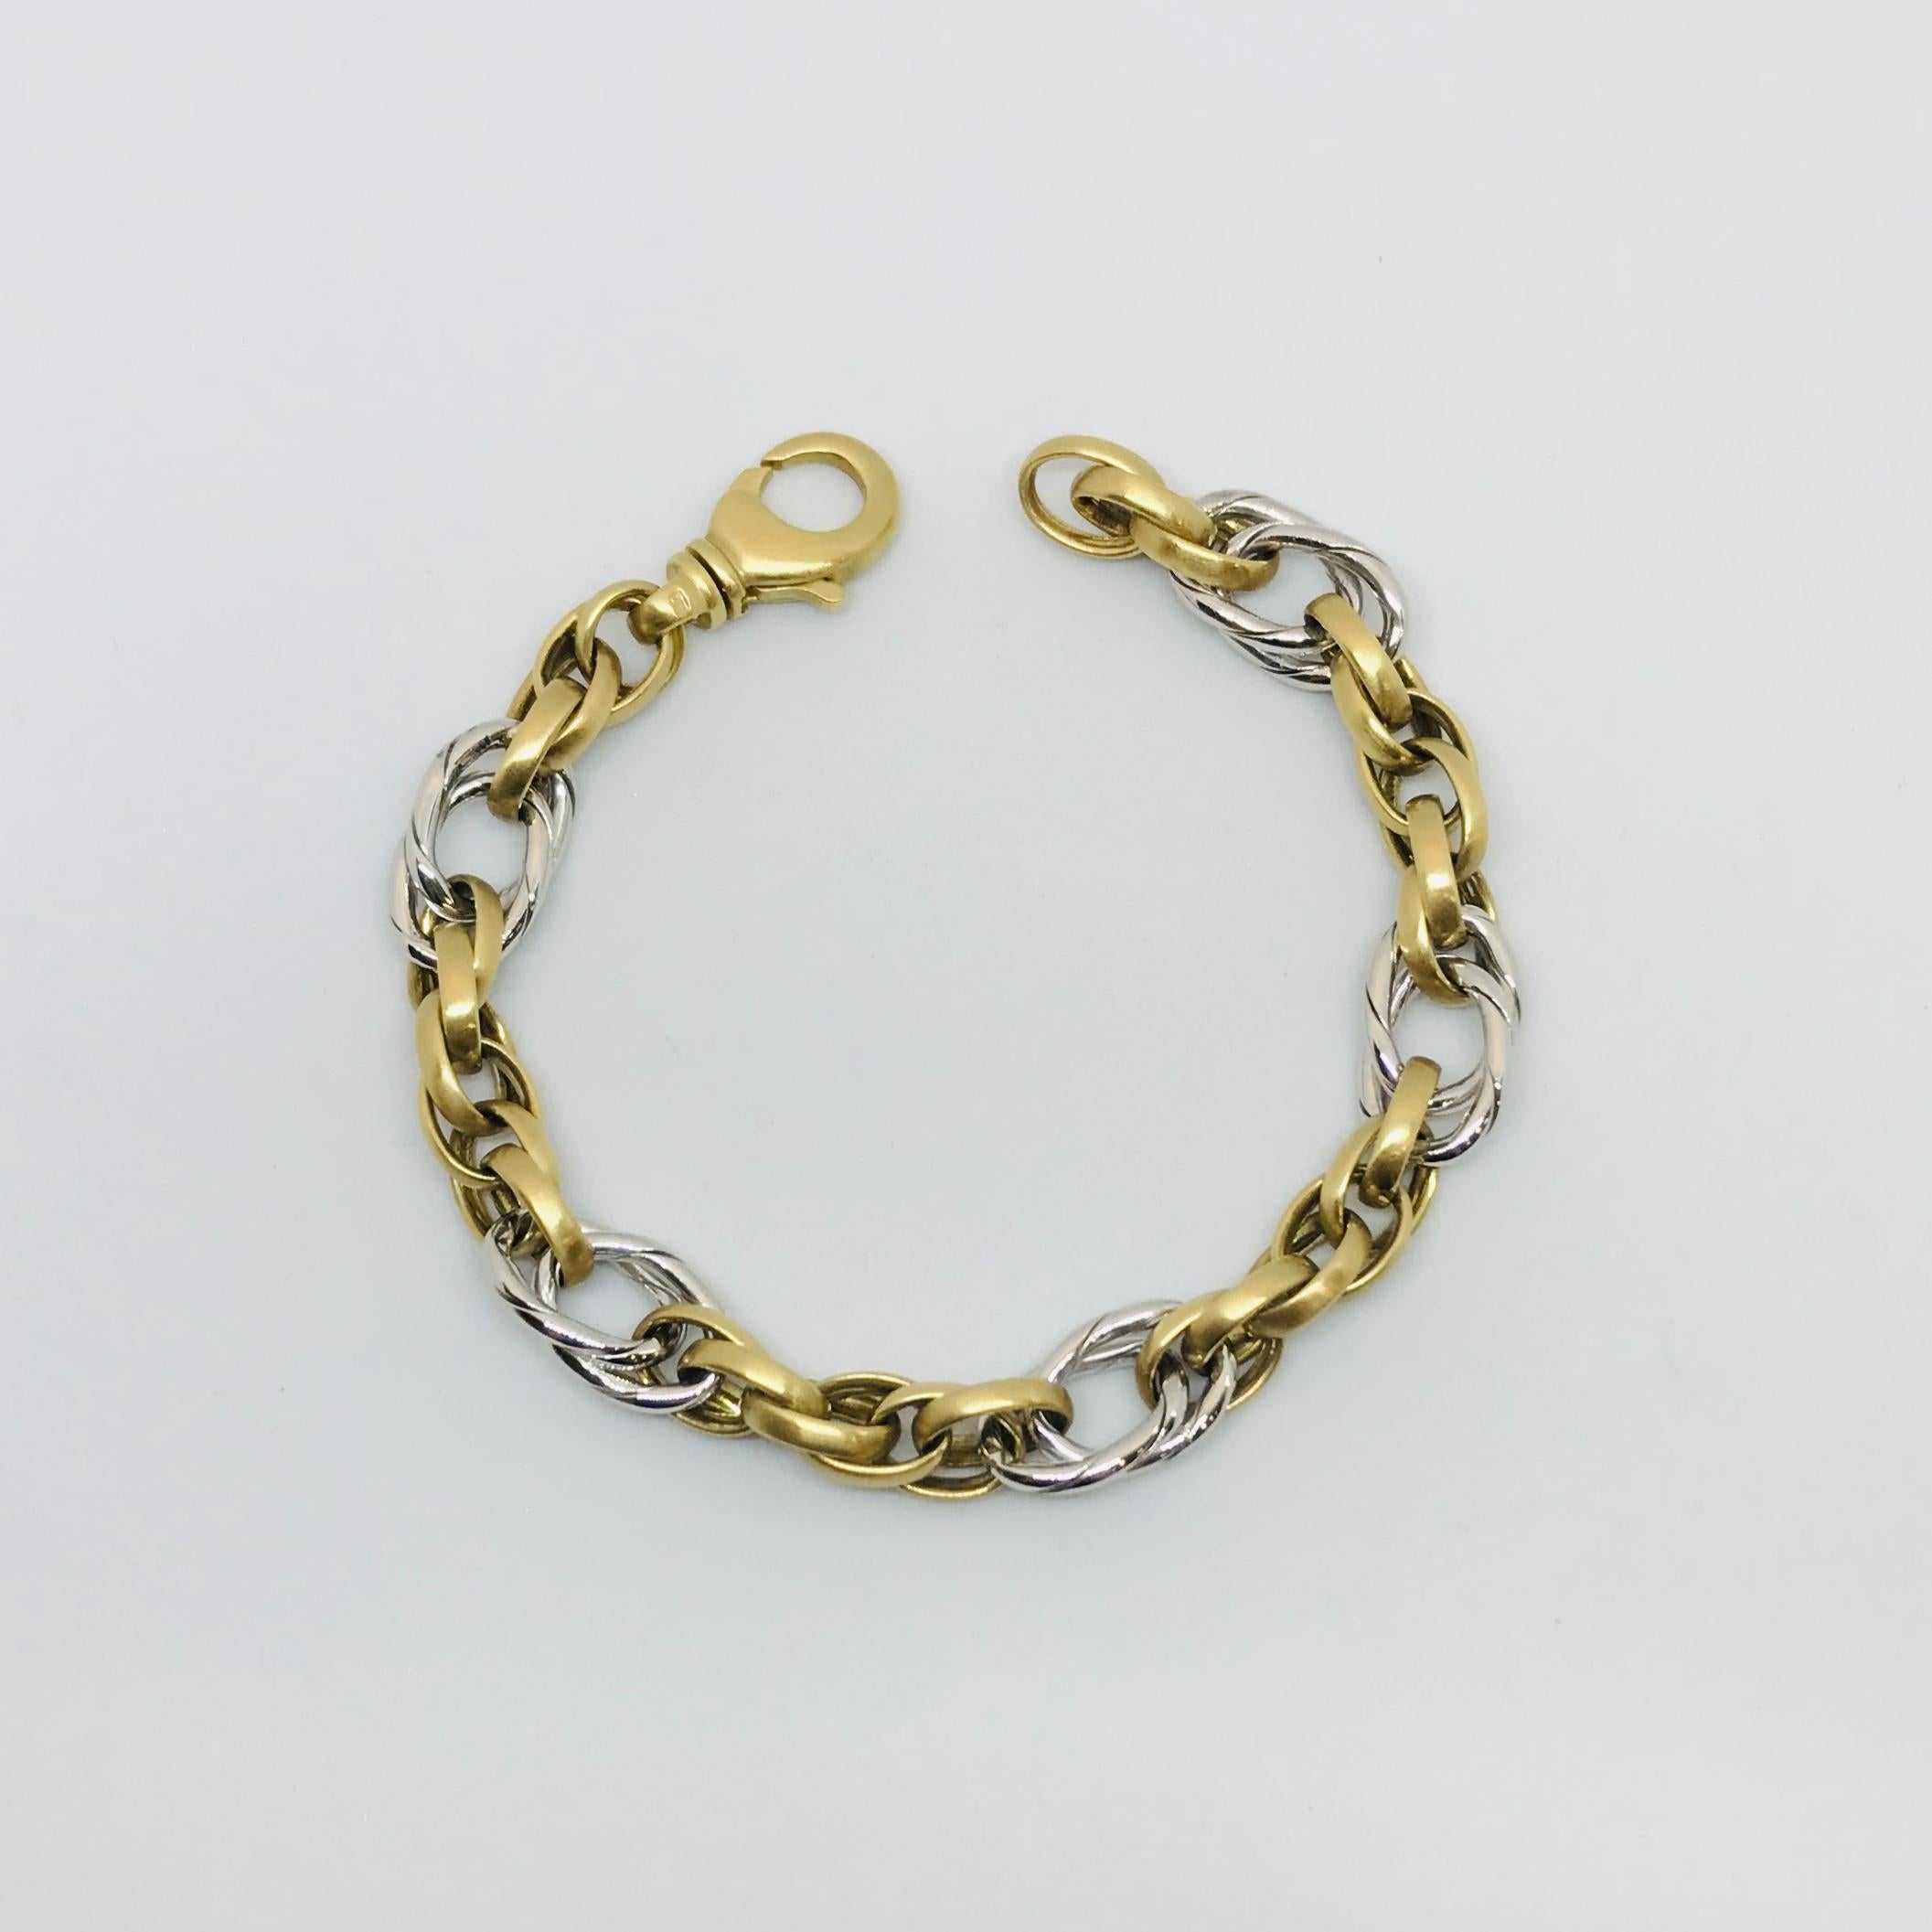 Contemporary White Gold Yellow Gold Handmade Woven Link Bracelet